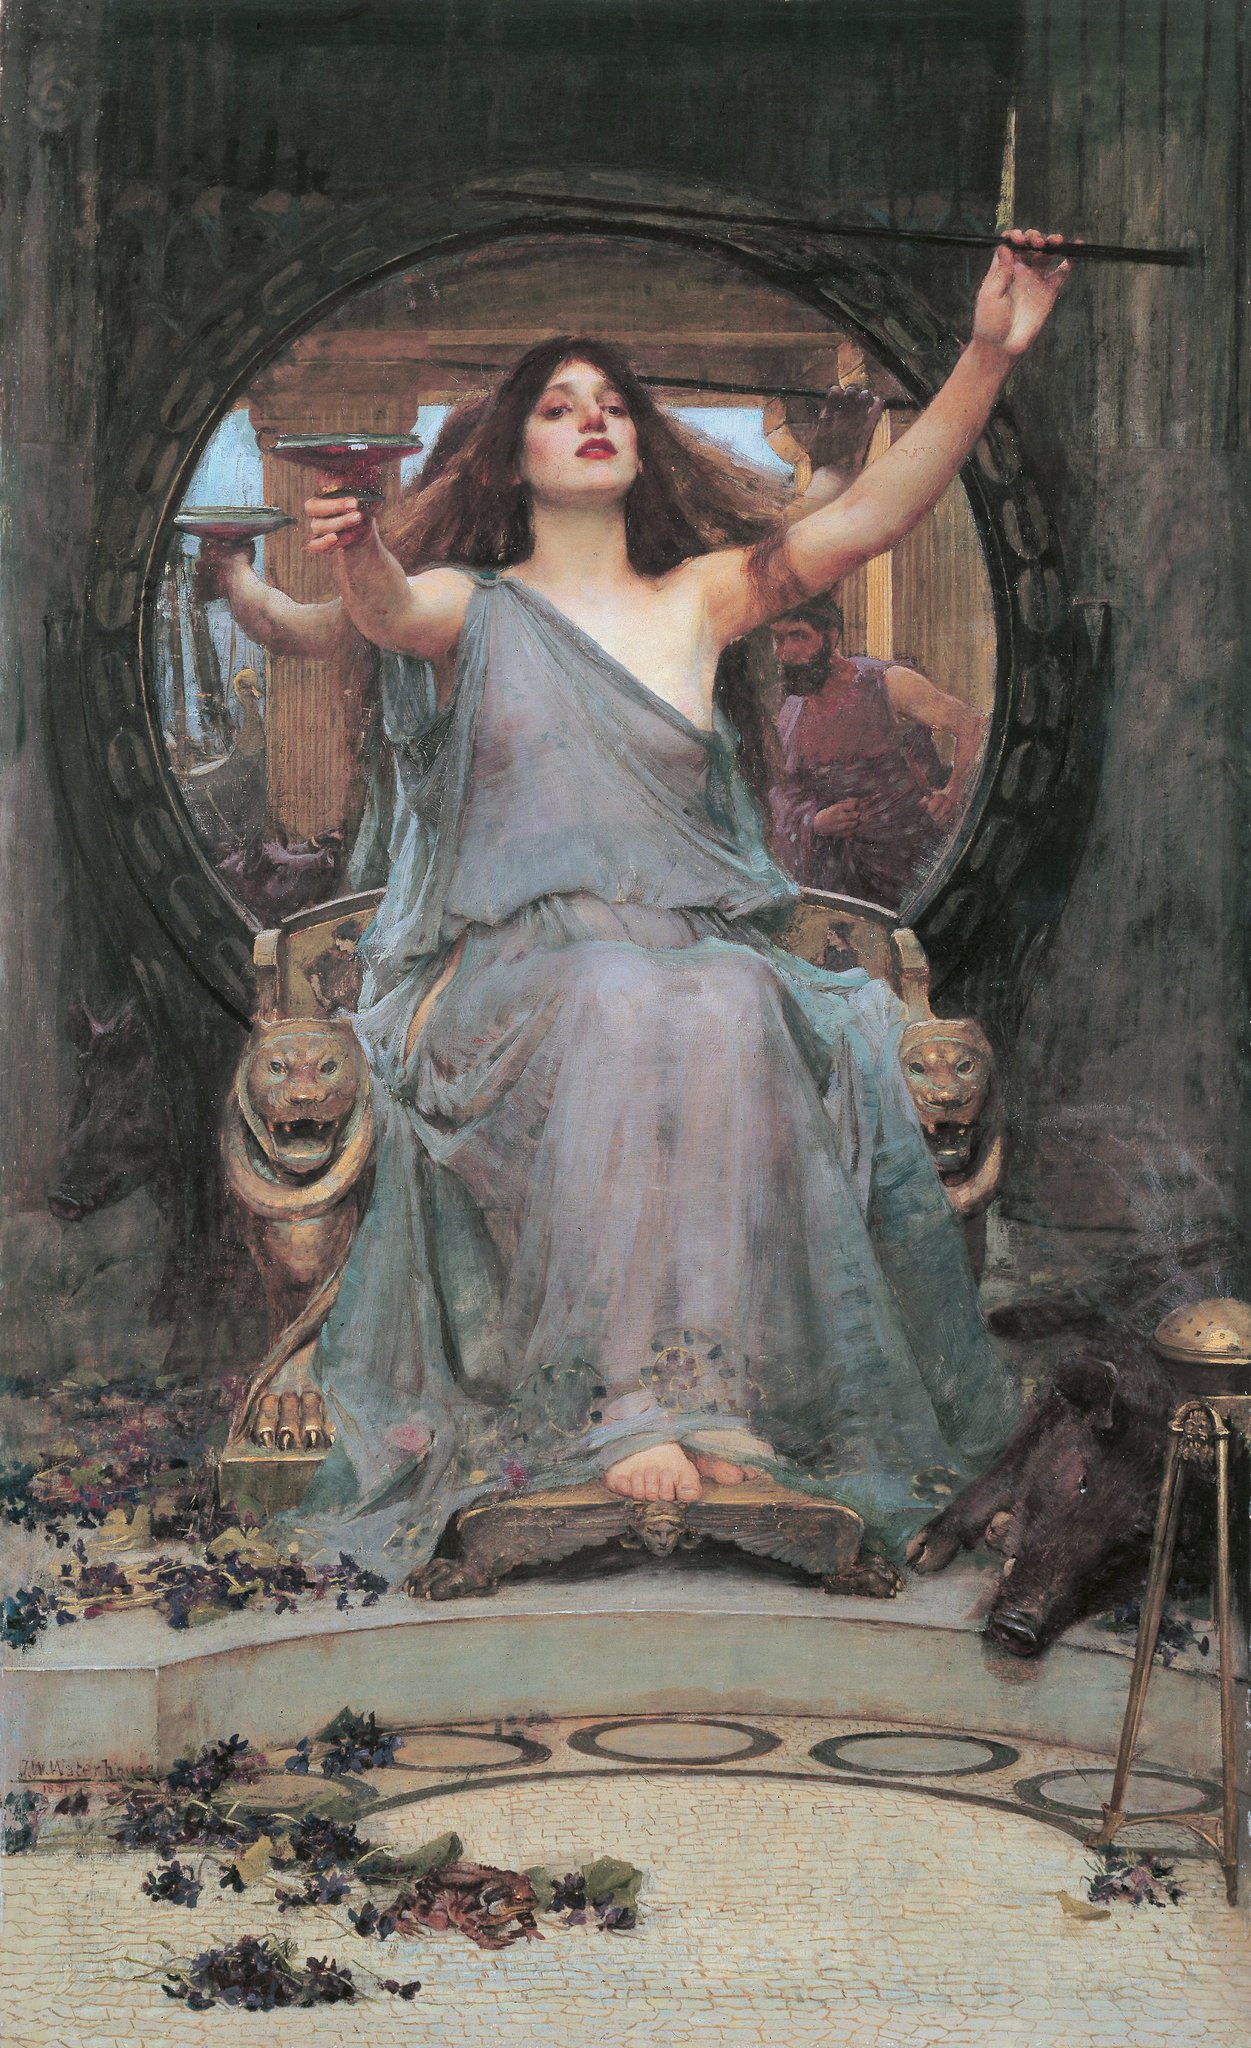 Circe Offering the Cup to Ulysses by John William Waterhouse, 1891